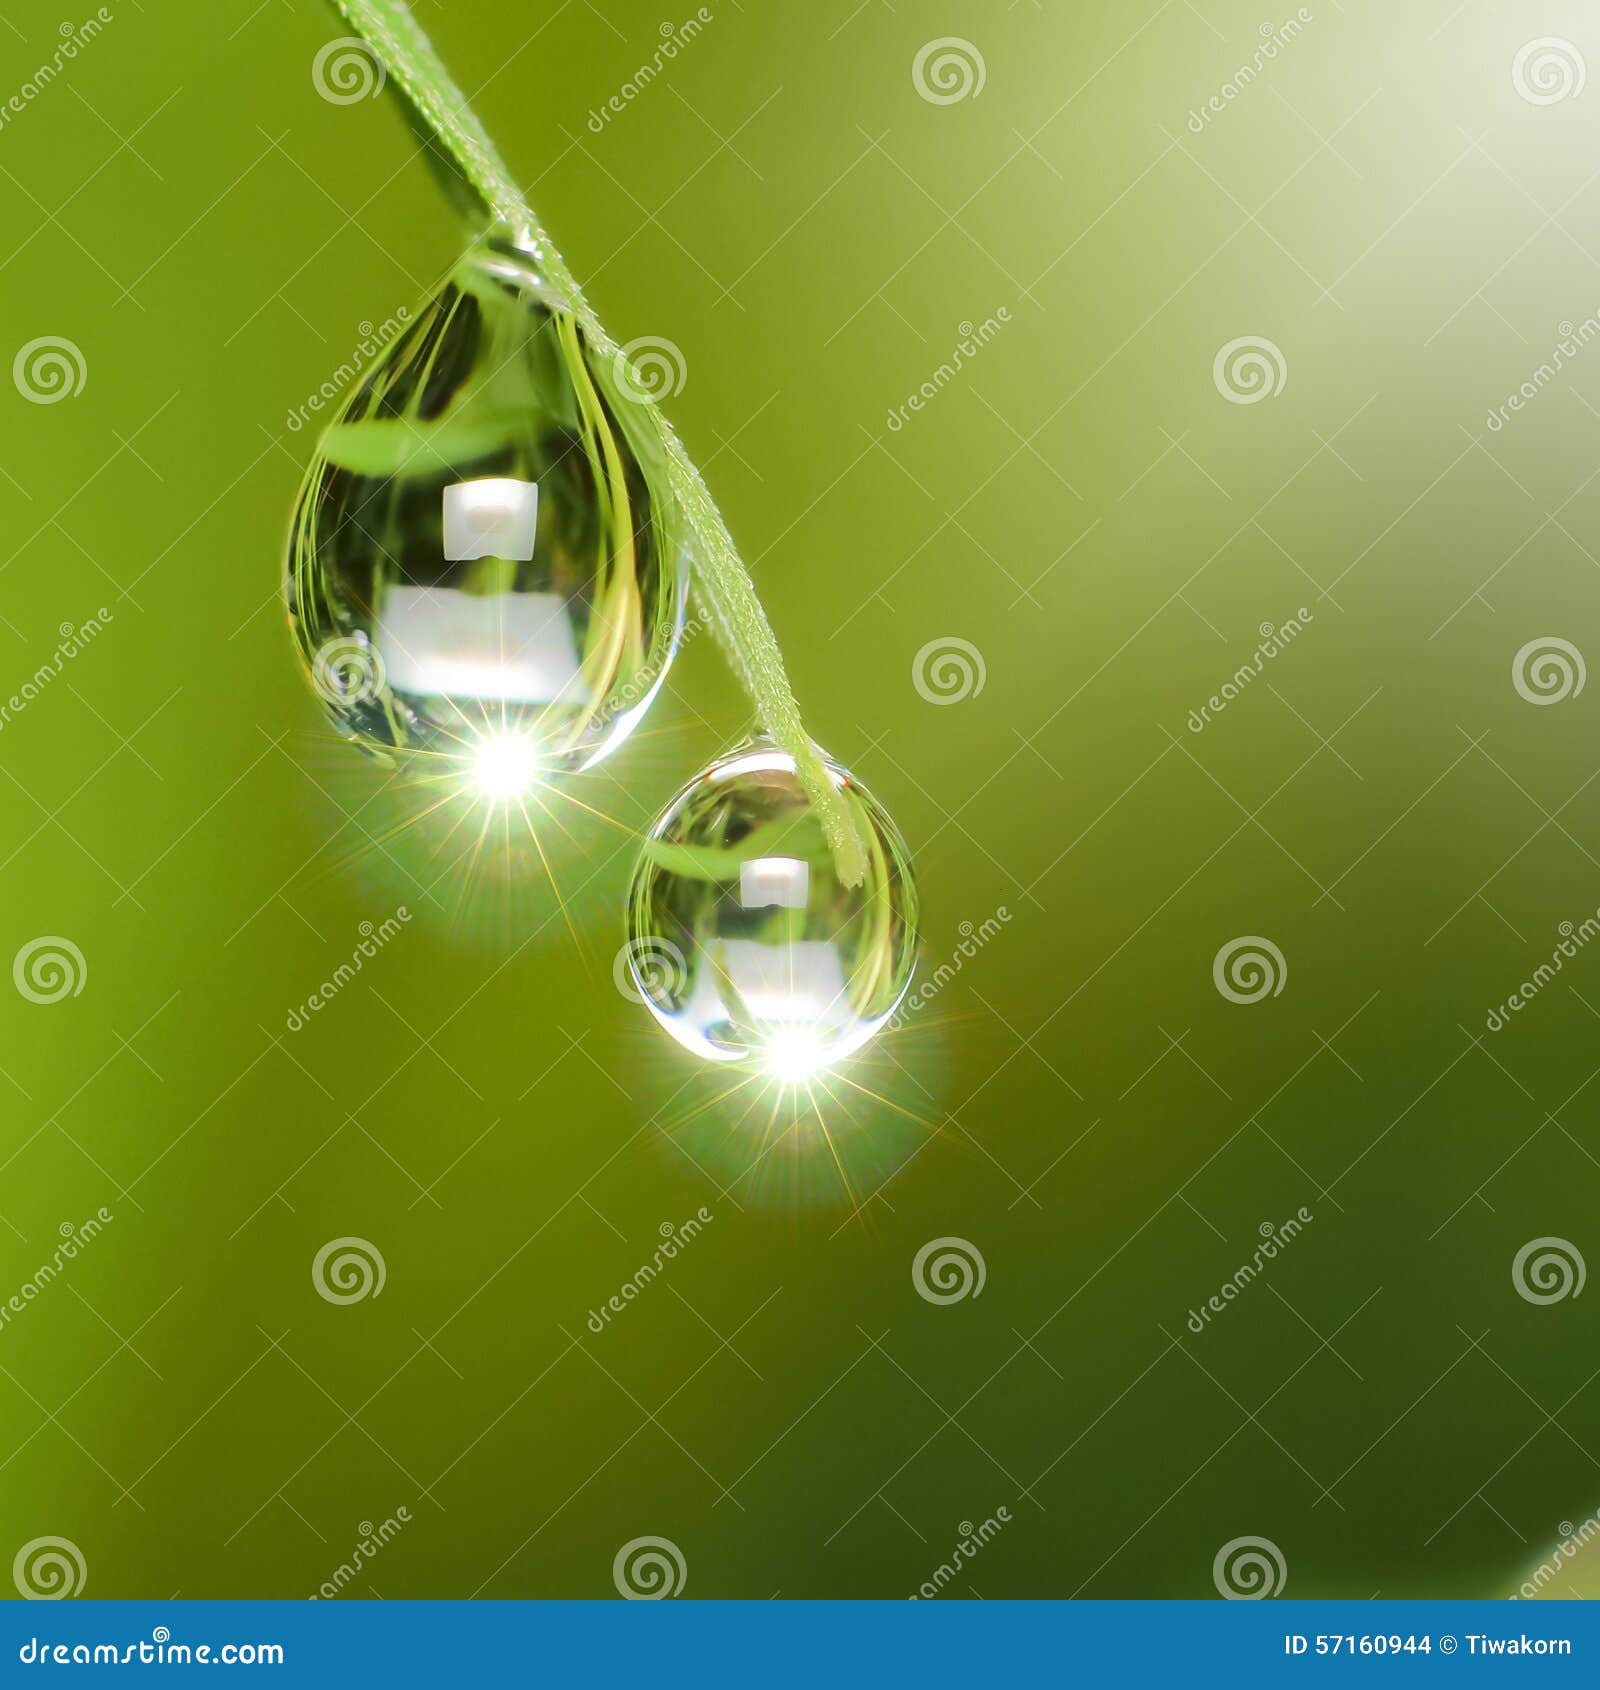 dew drops with light fair